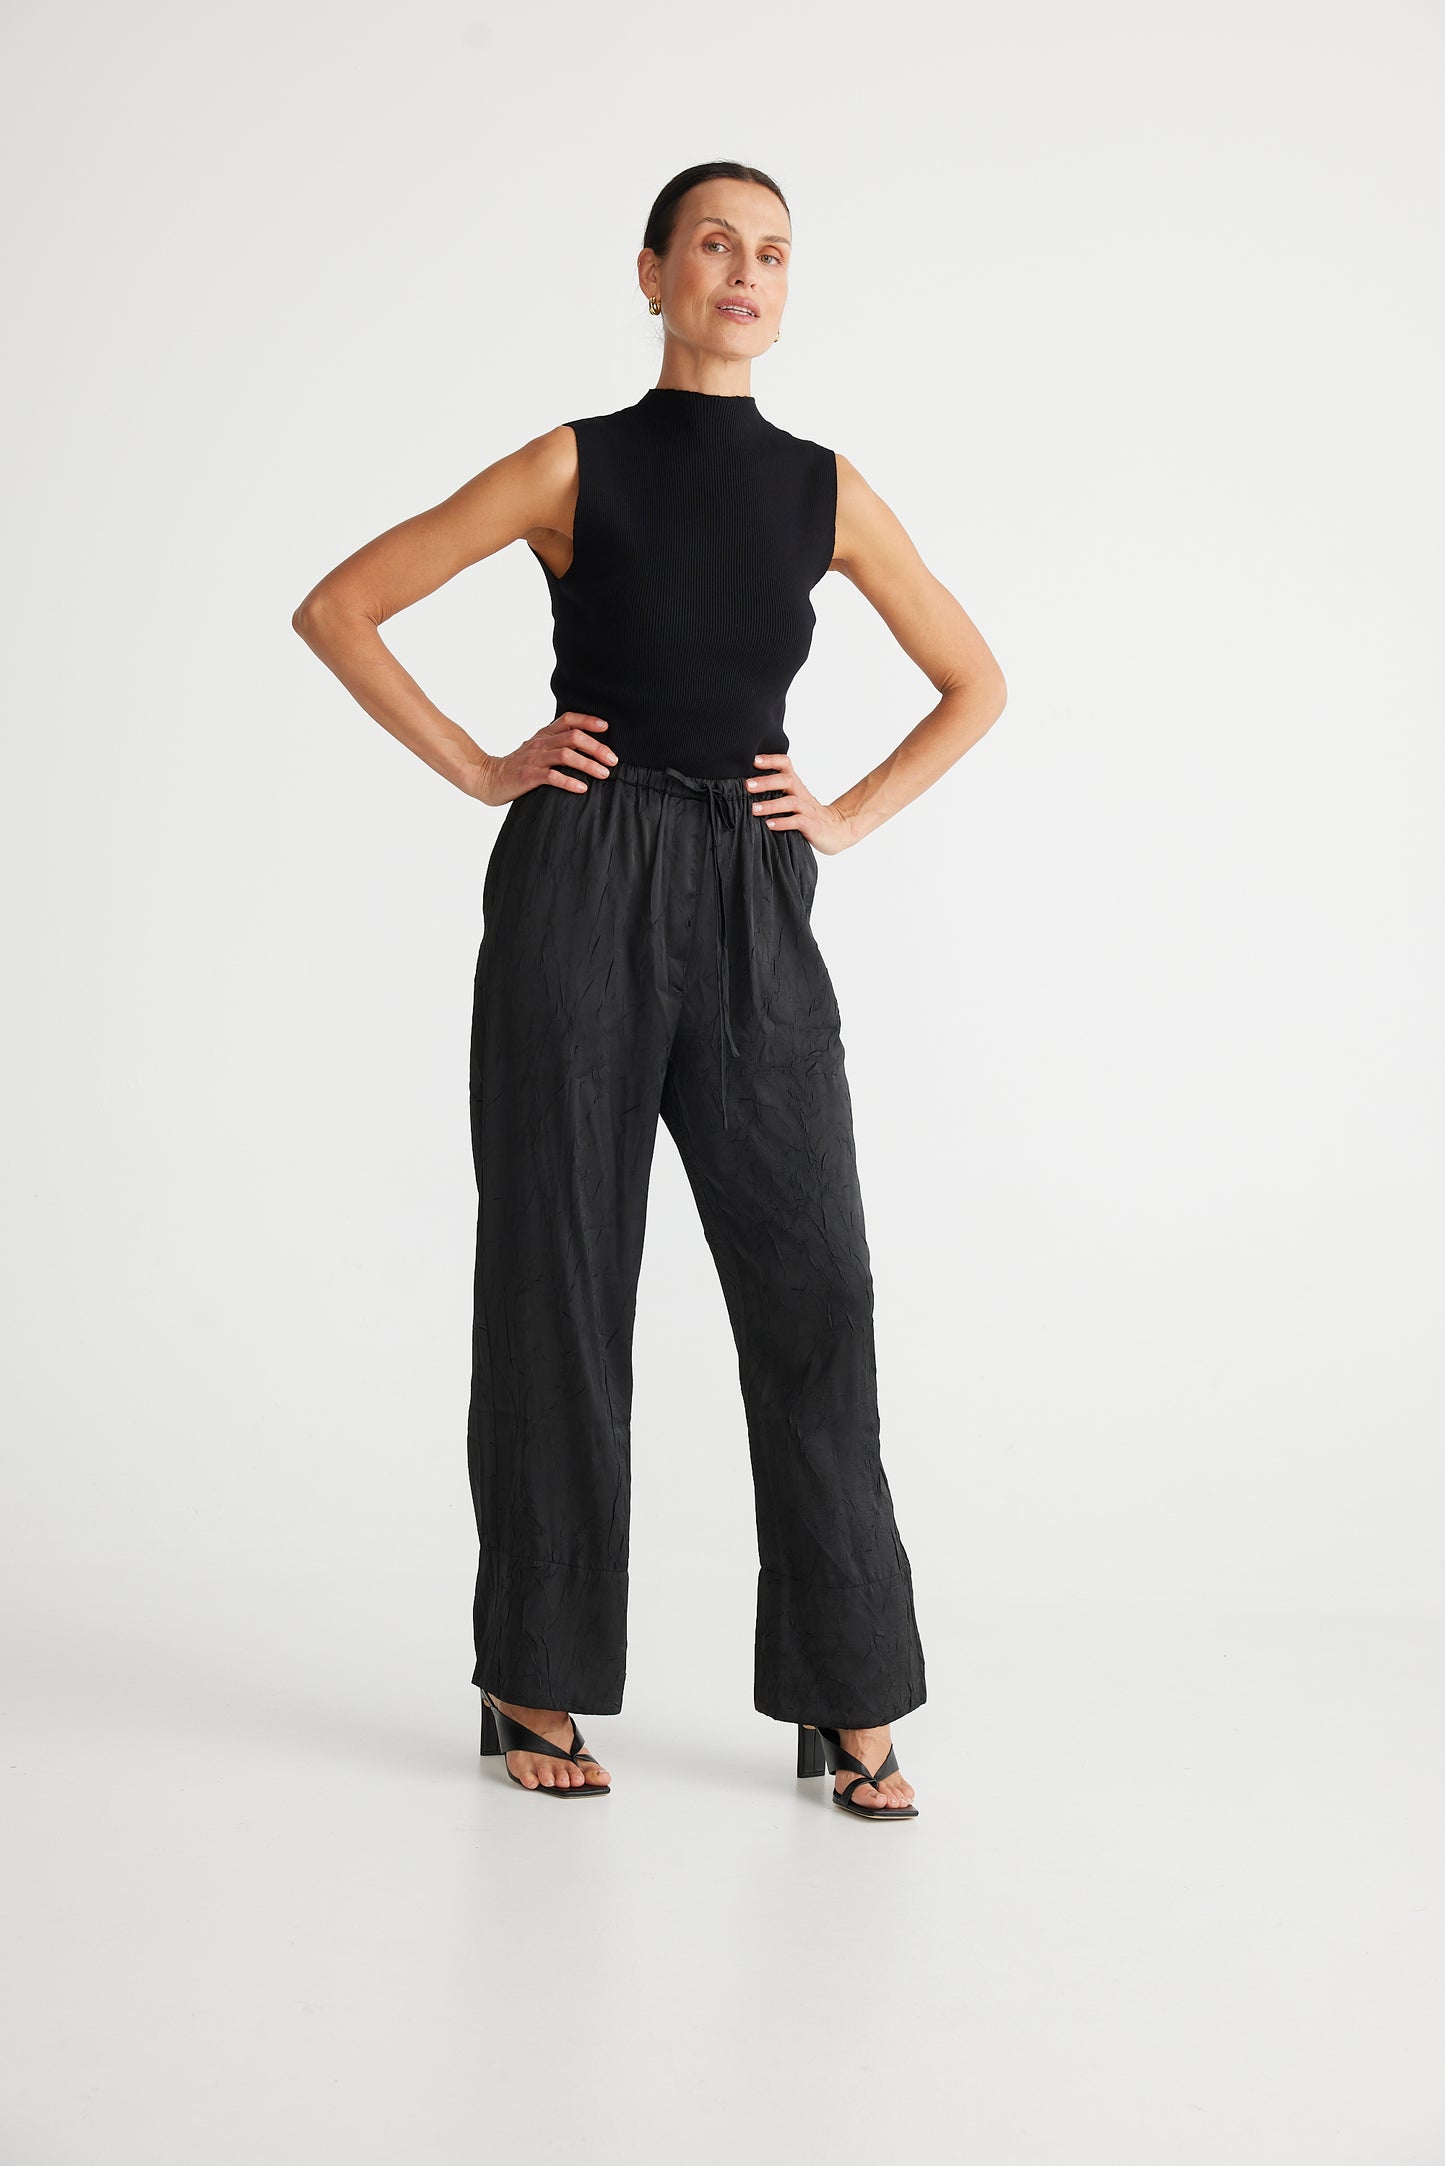 Second Valley Pants - 40% OFF AT CHECKOUT